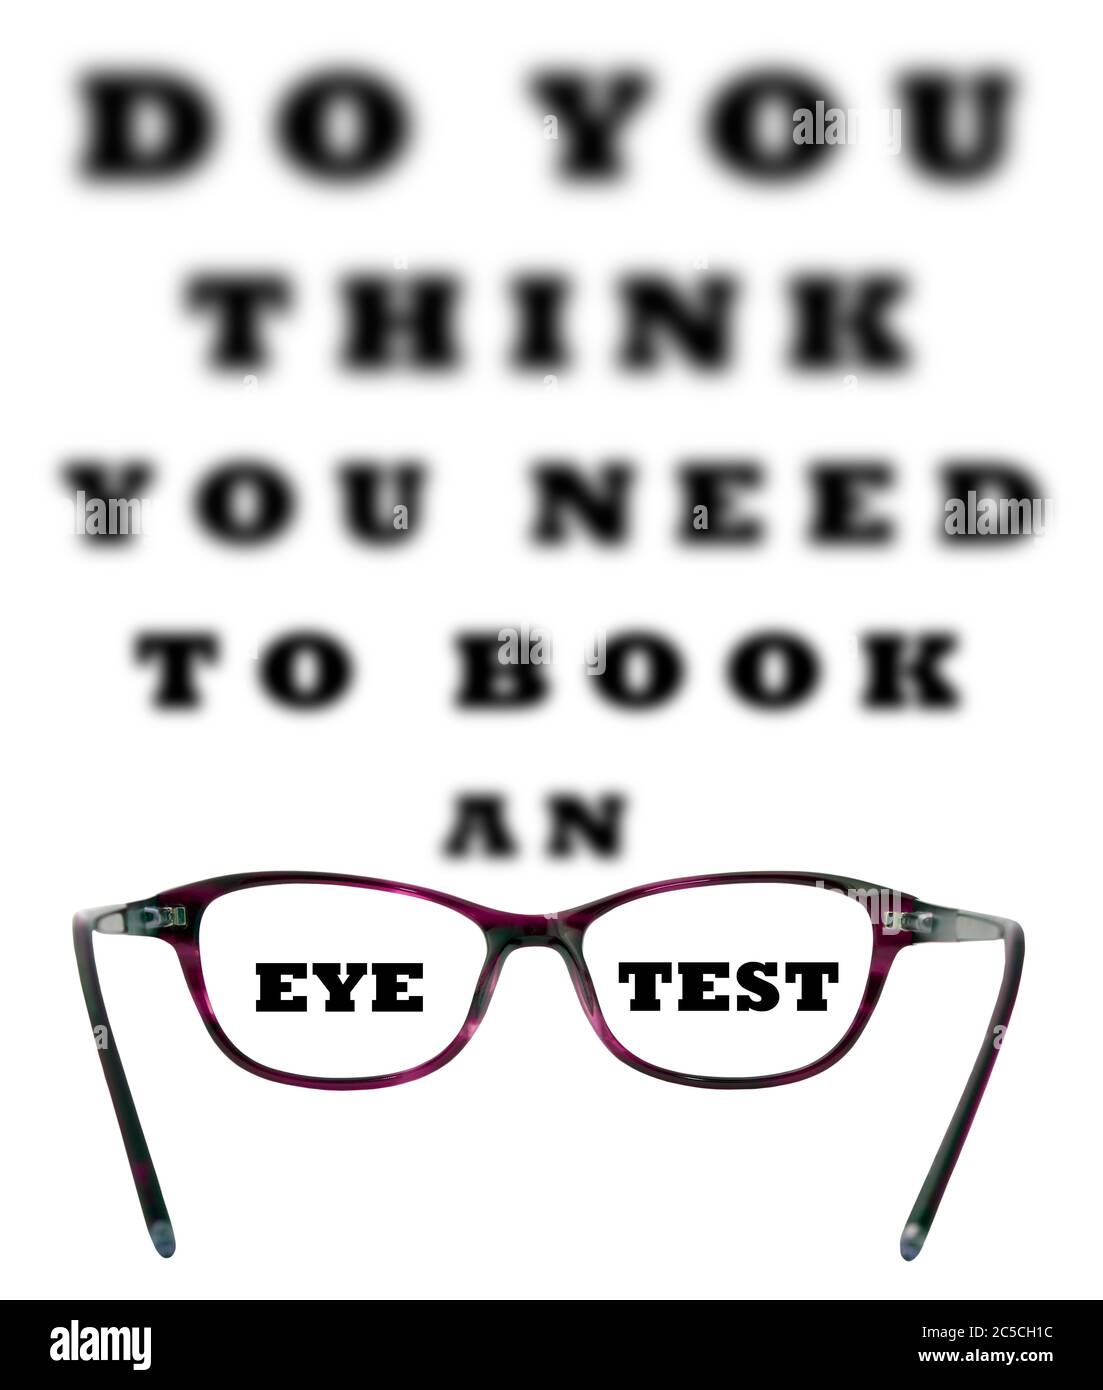 Do you think you need to book an eye test blurred chart with the words eye